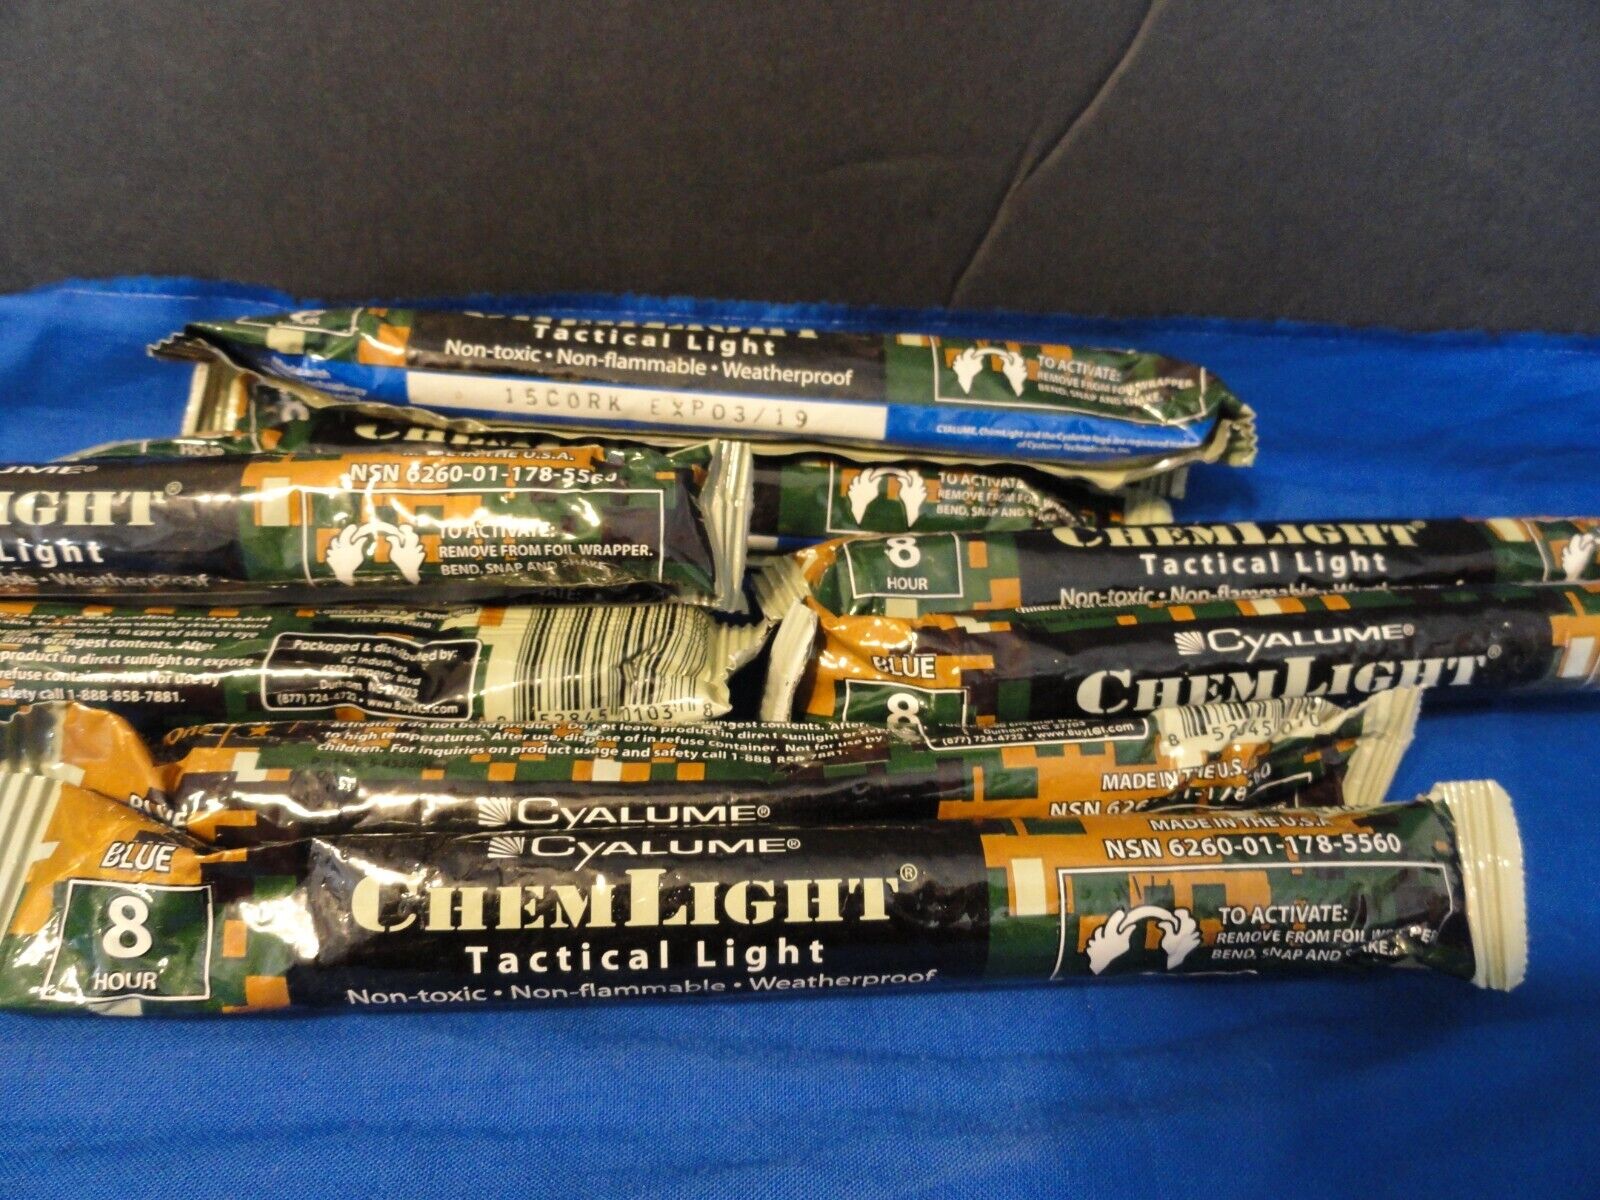 CHEMLIGHT TACTICAL LIGHT BY CYALUME TECHNOLOGIES BLUE 8 HOUR BOX OF 10